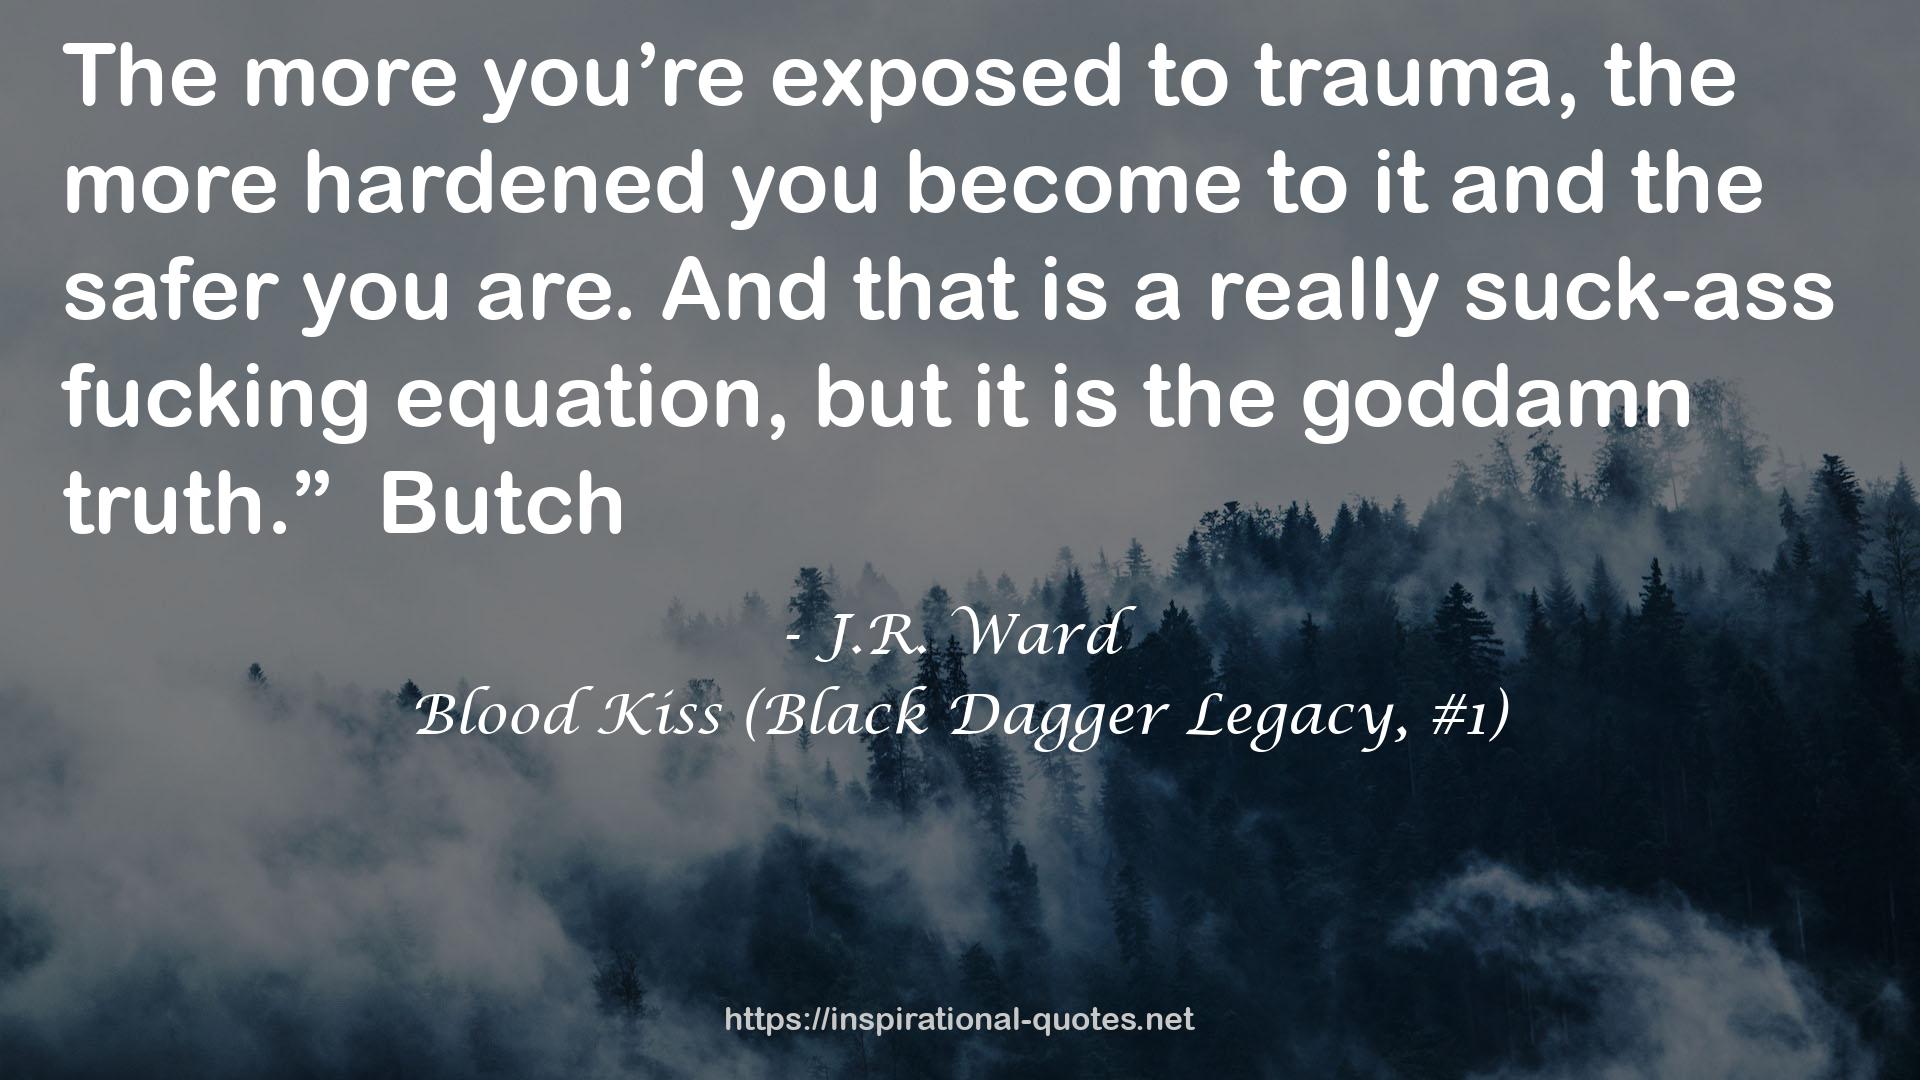 Blood Kiss (Black Dagger Legacy, #1) QUOTES